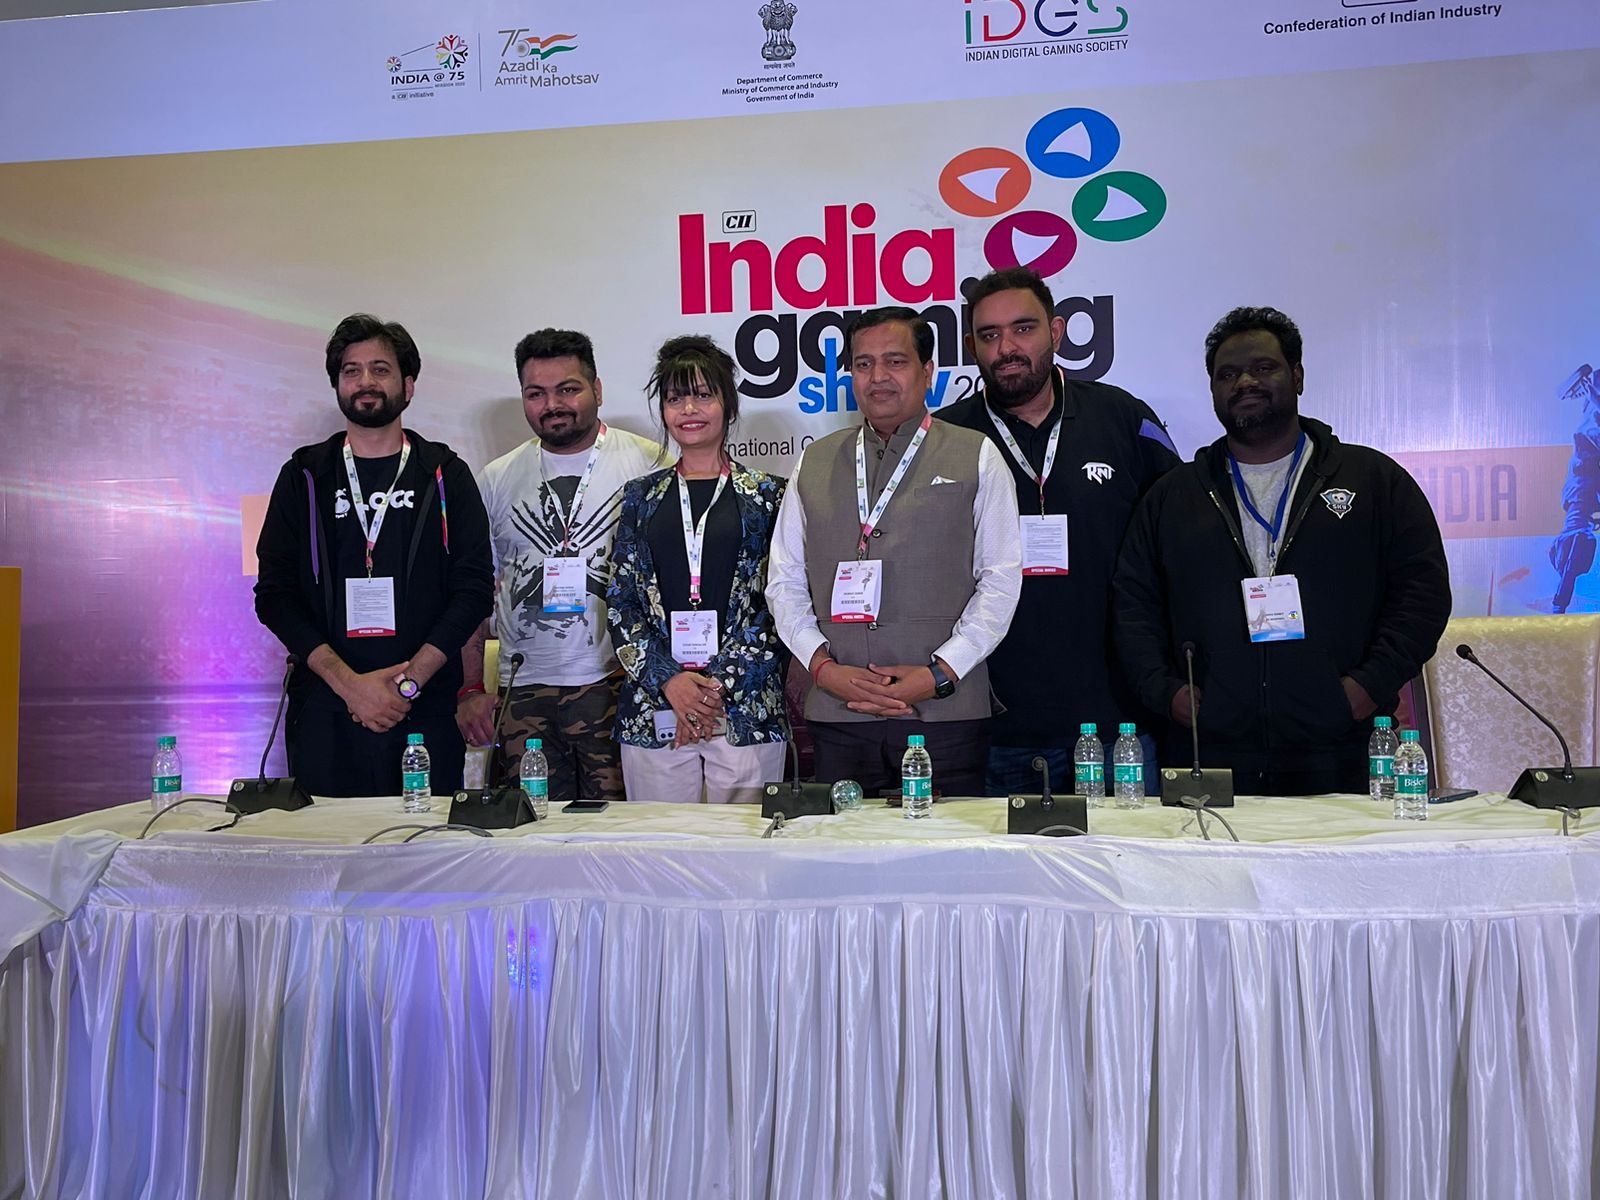 All you need to know about the highlights of India Gaming Show Day 2 held in New Delhi covered